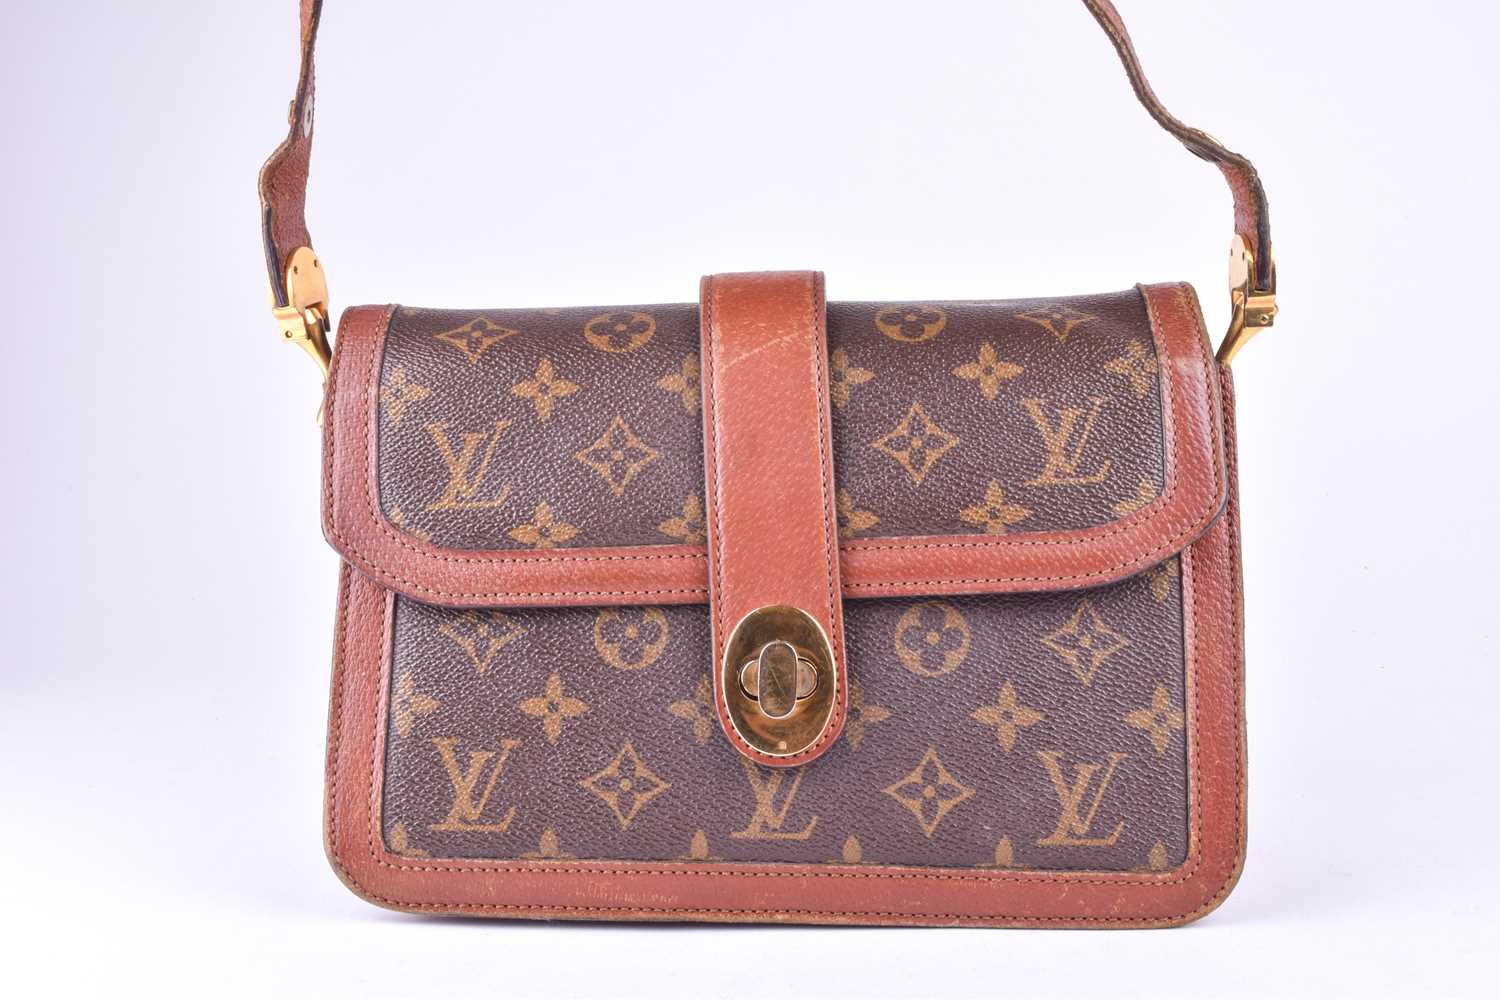 Louis Vuitton. A vintage 1980s monogram leather satchel handbag, with brown leather and monogram - Image 11 of 11